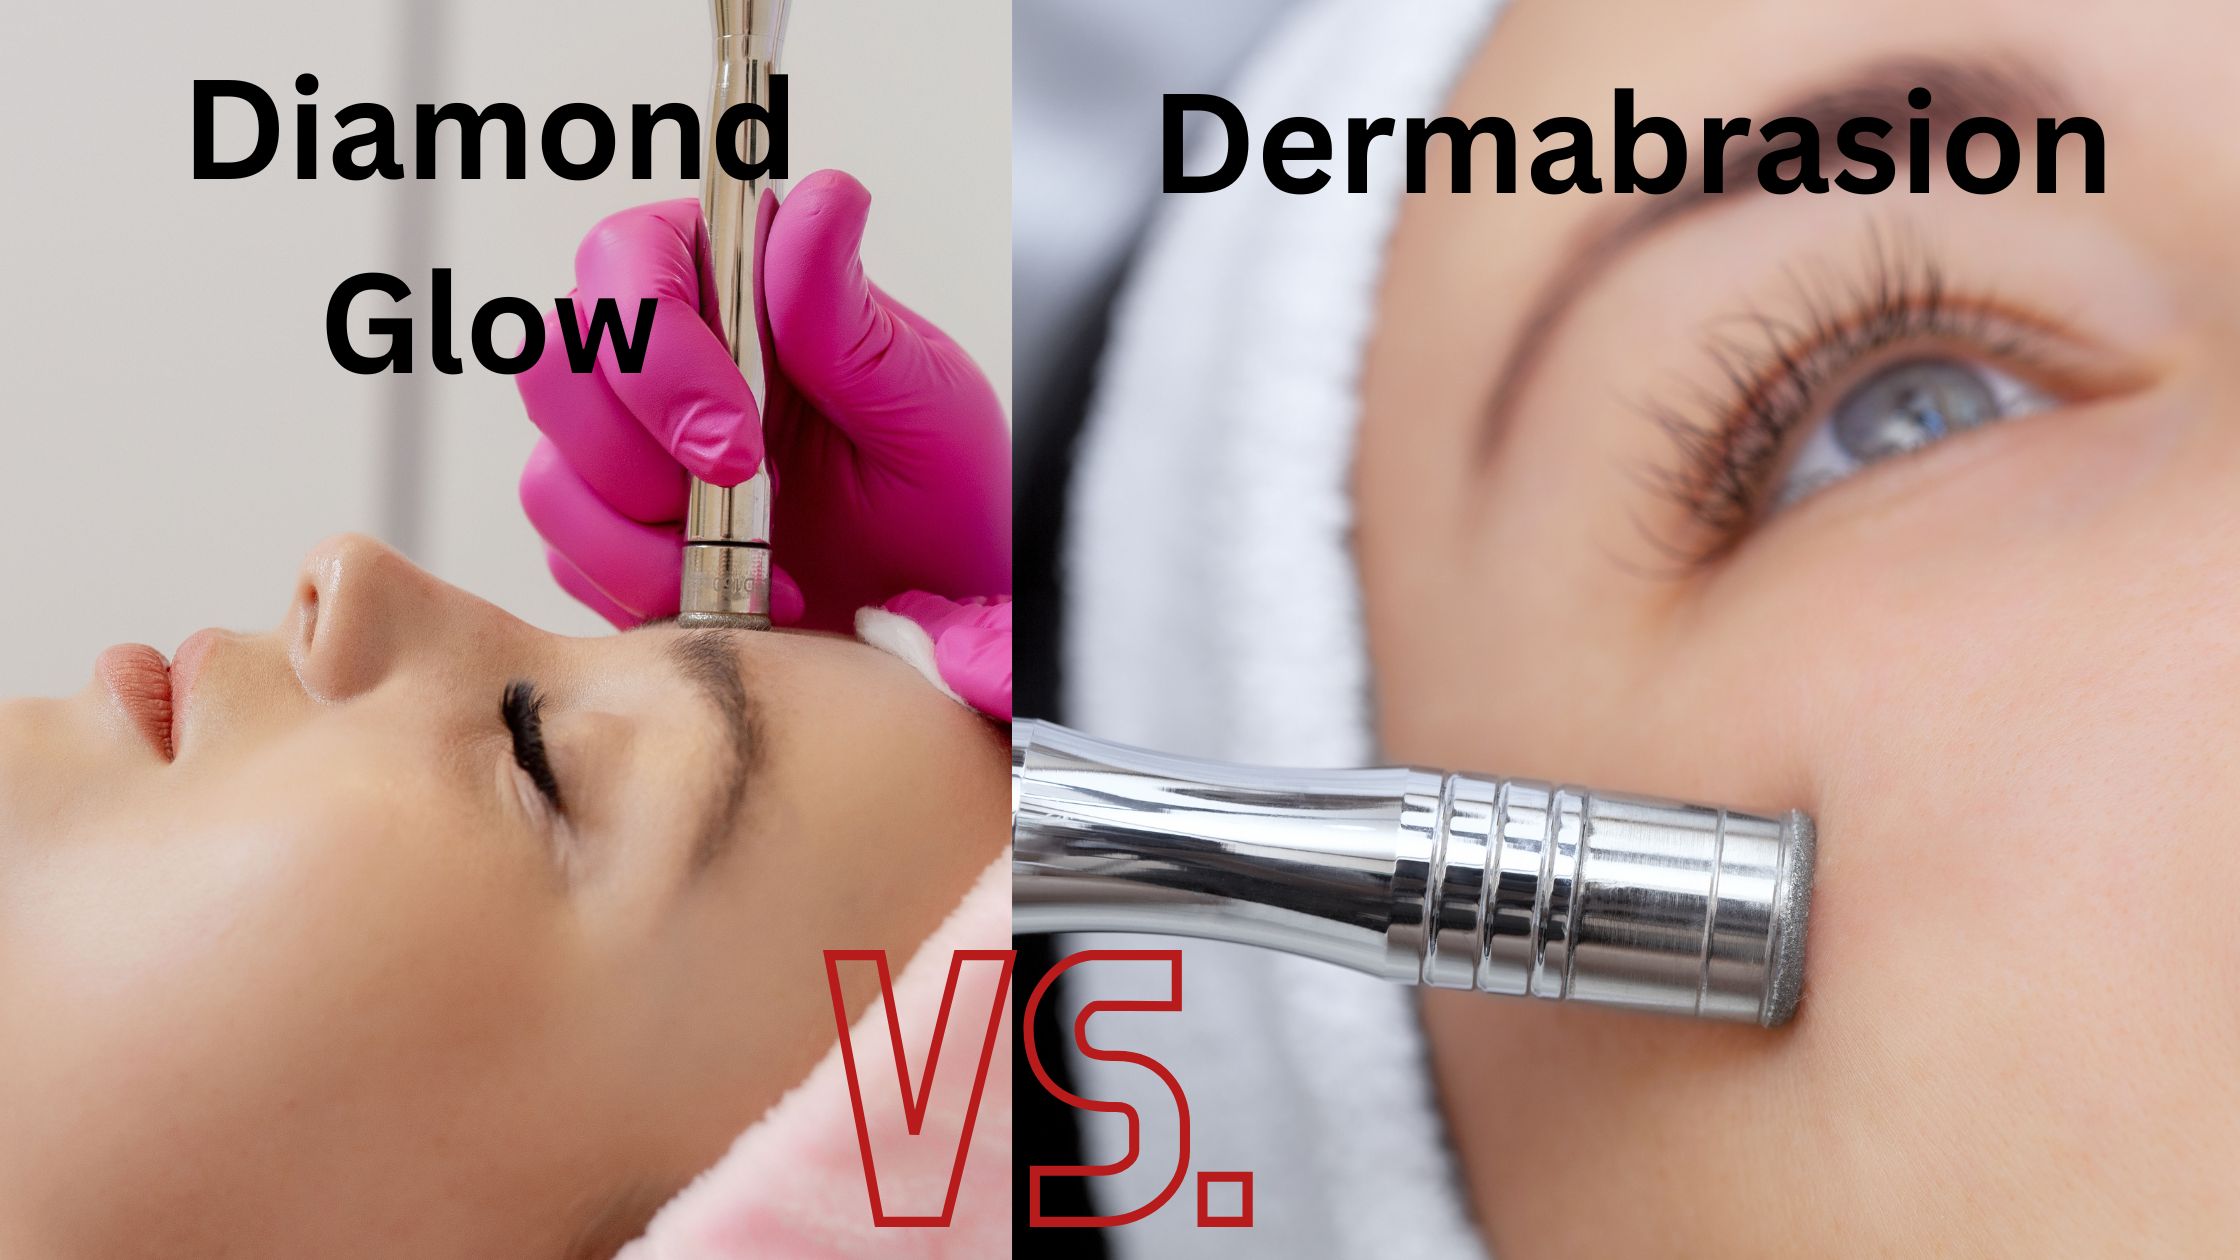 You are currently viewing Diamond Glow vs Dermabrasion: What Is The Difference?